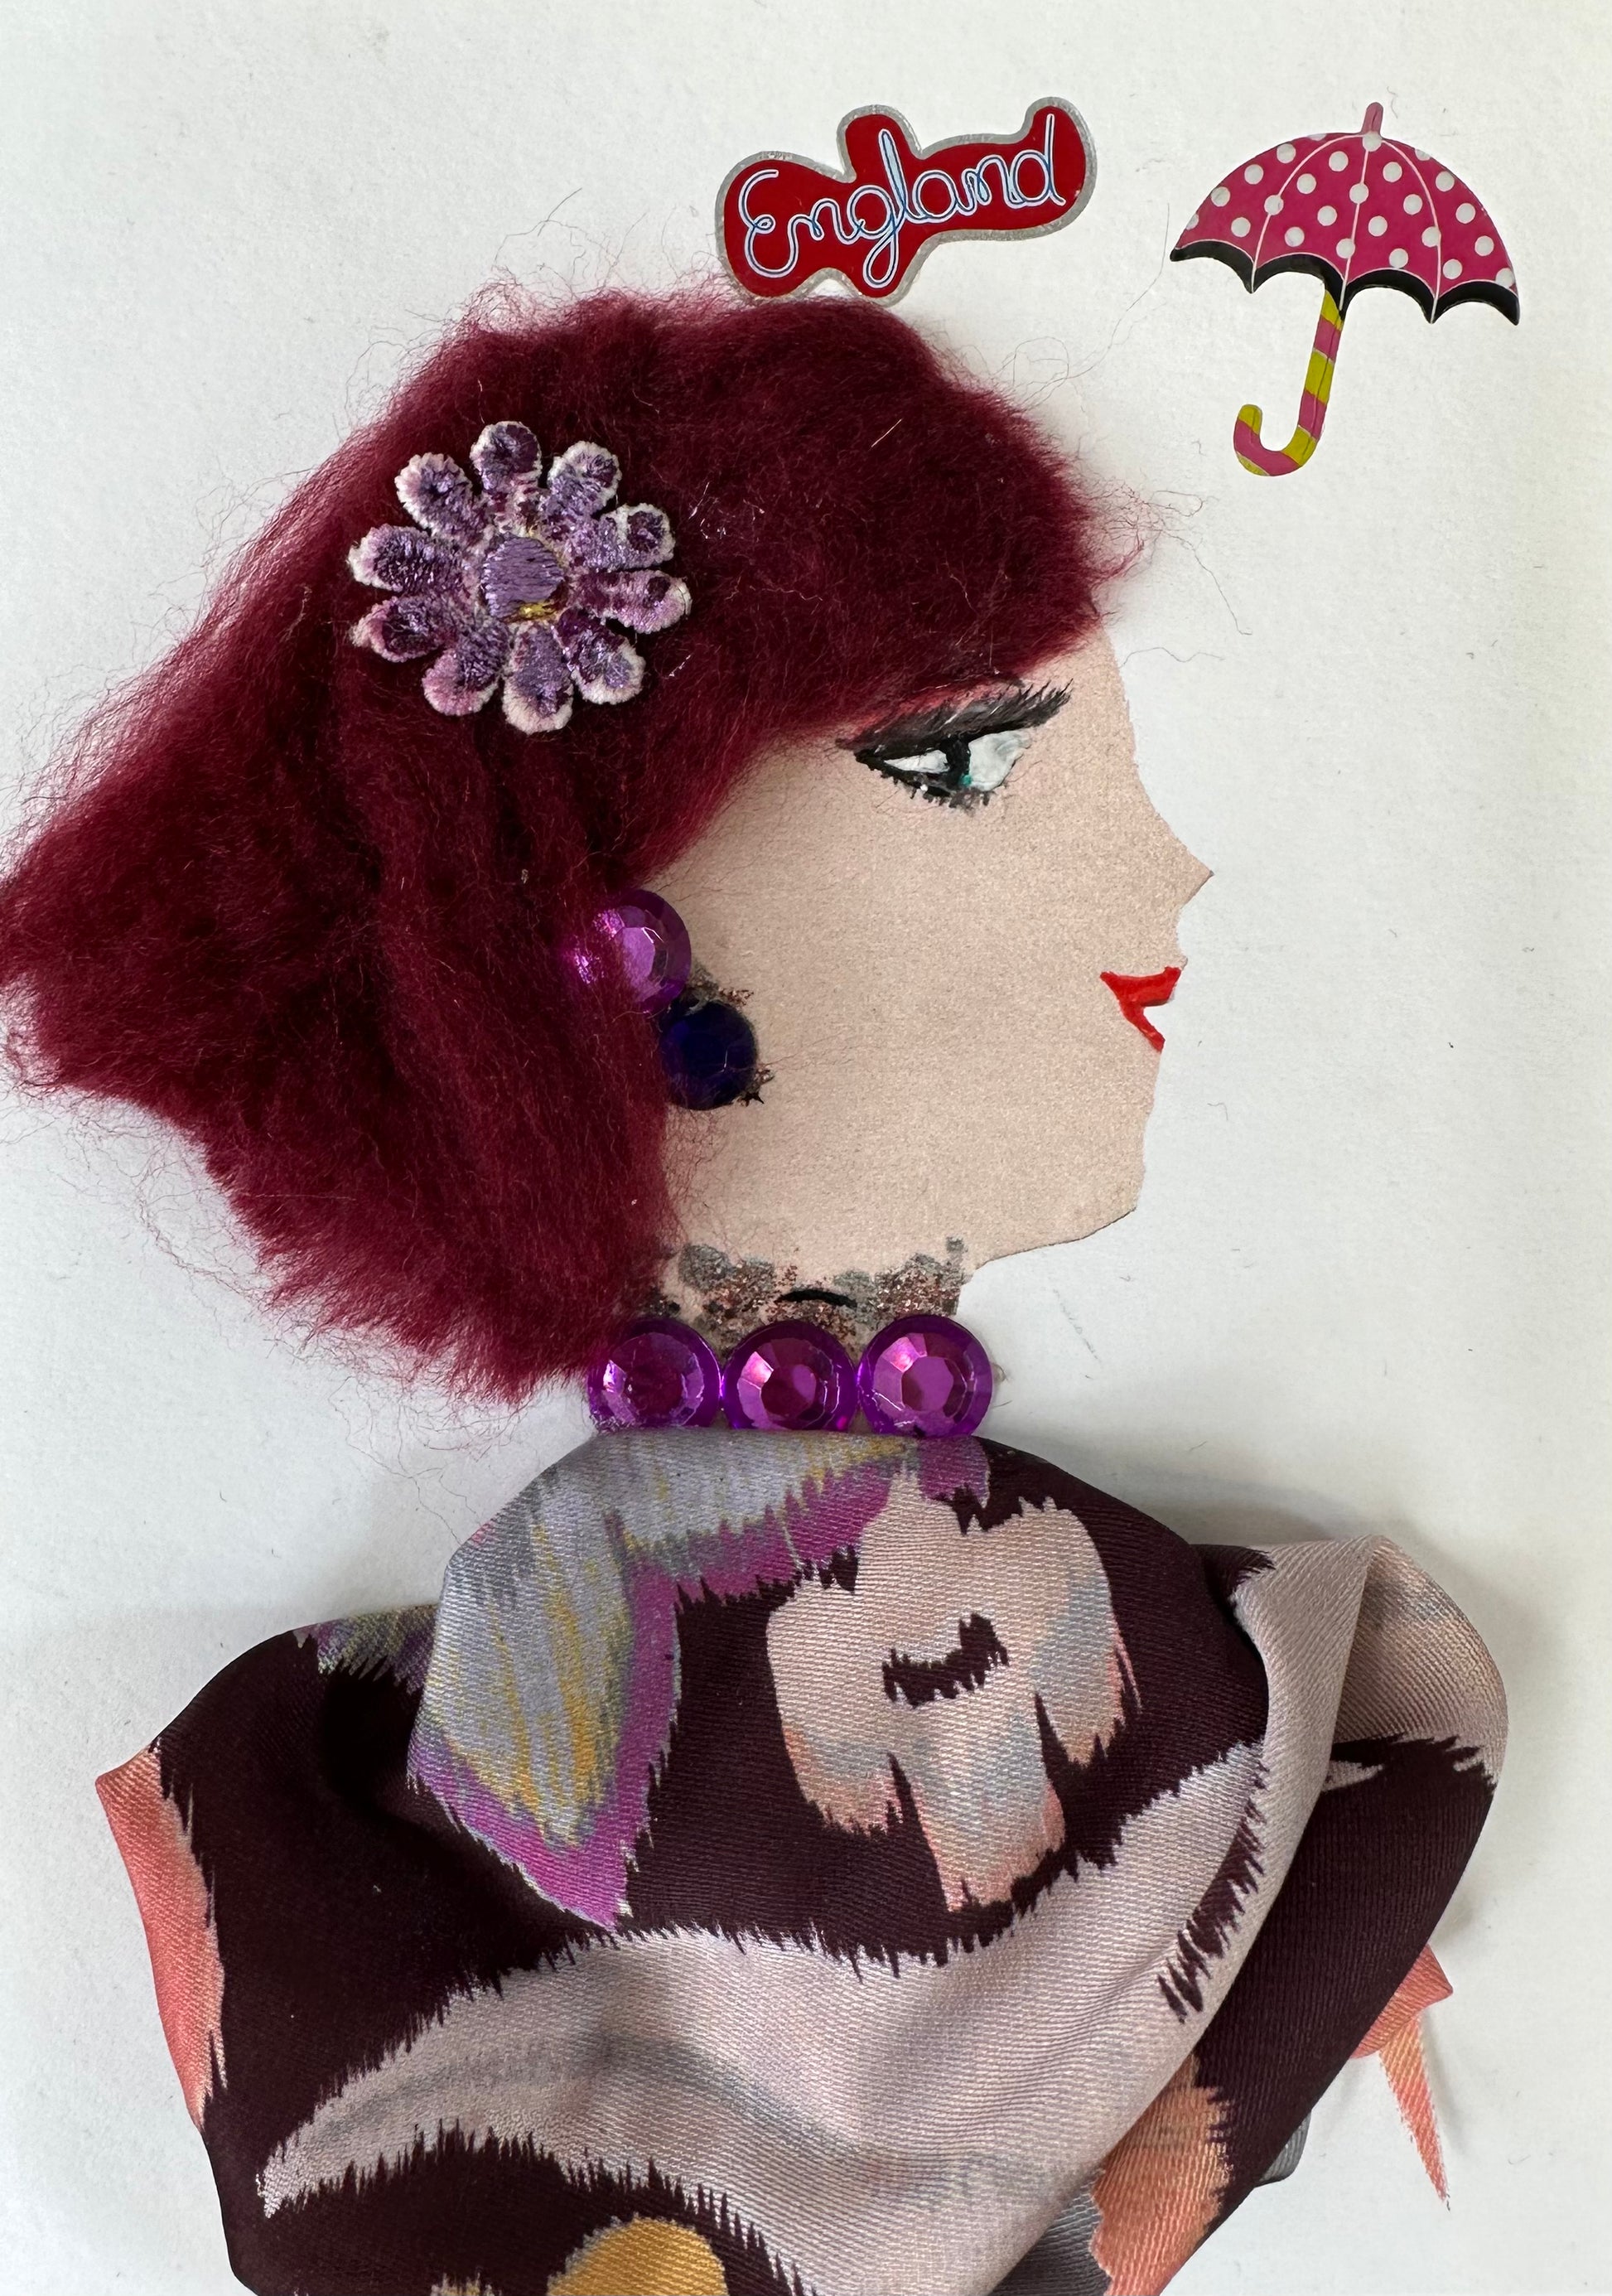 I designed this handmade card of a woman wearing a multi-coloured blouse with a purple flower hair piece She has red hair and an umbrella in the right corner.